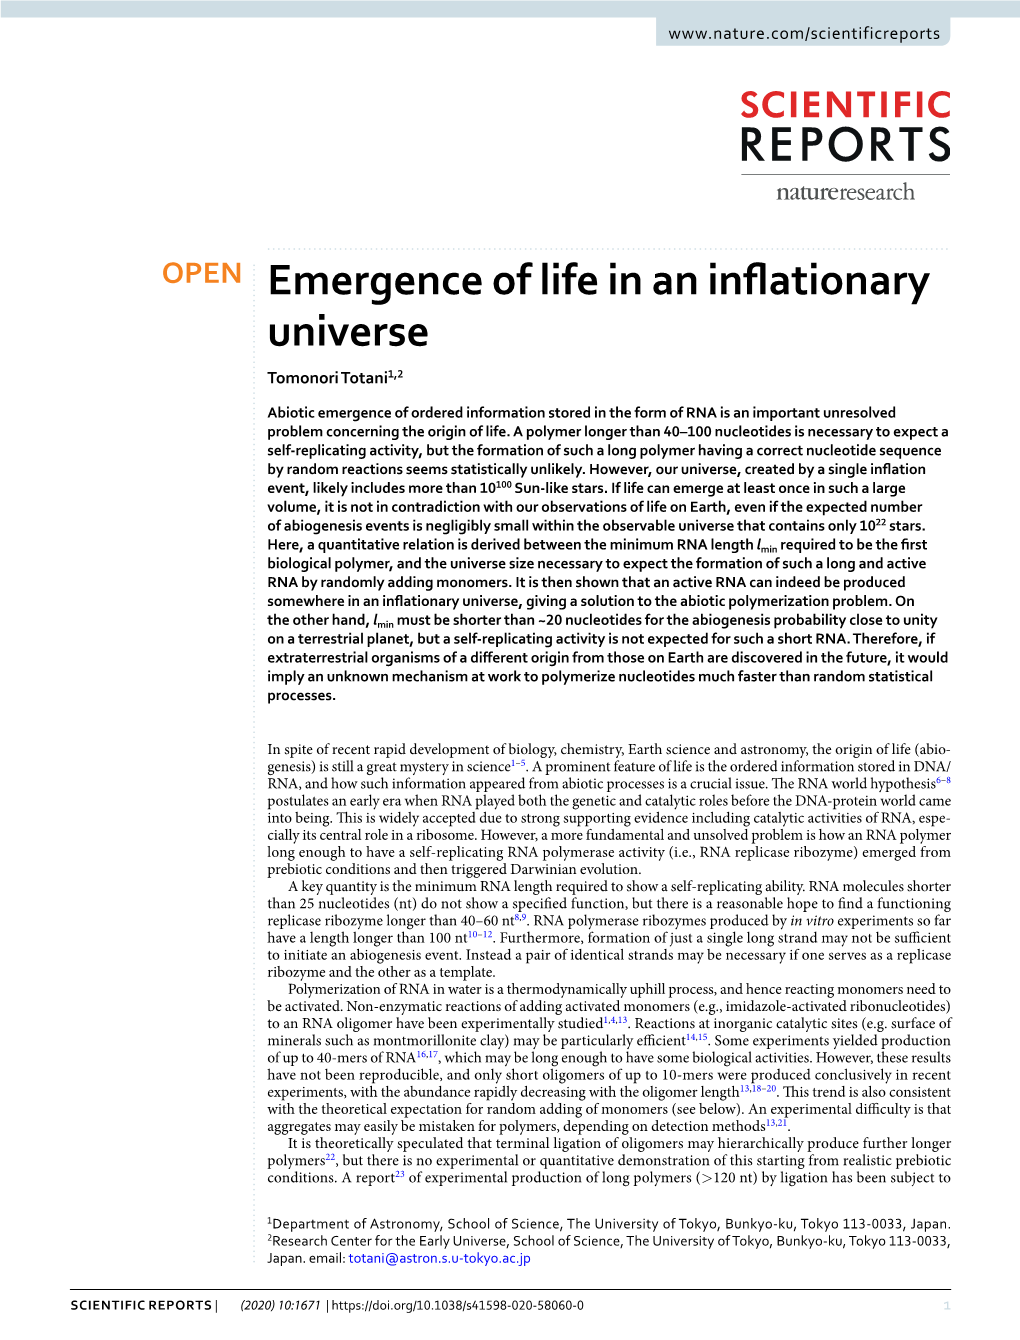 Emergence of Life in an Inflationary Universe